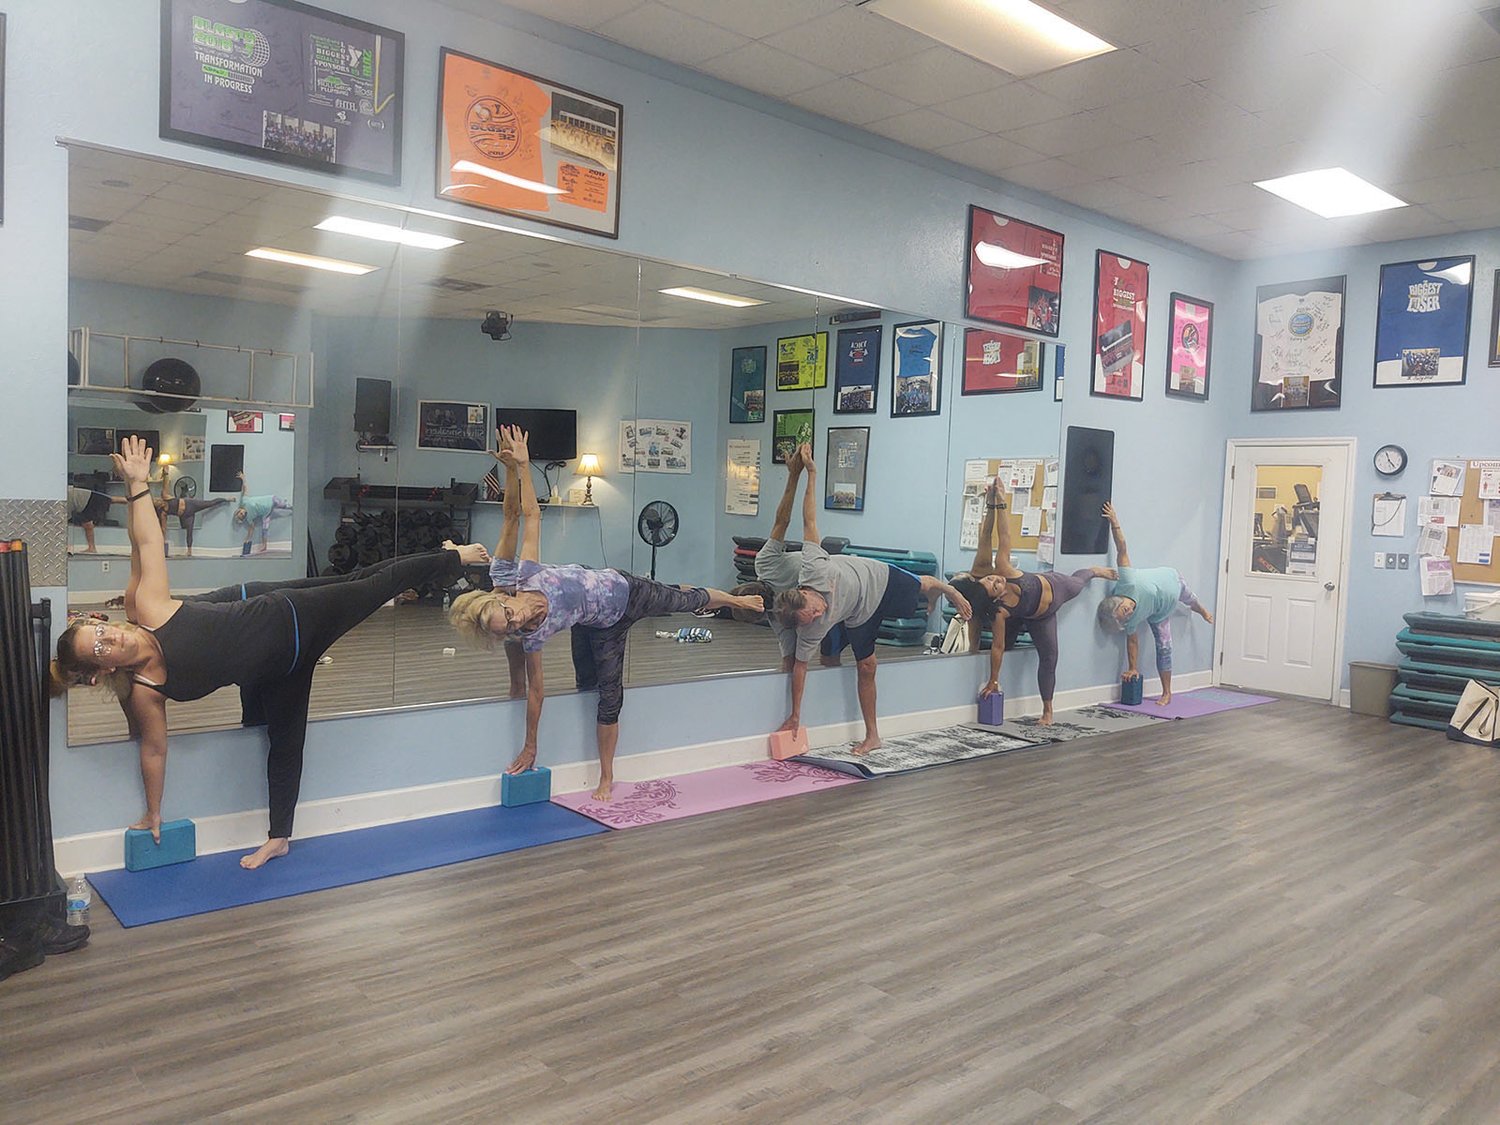 Ashley, Darlene, Ken, Jessica and Linda use blocks and the wall  for stability during a yoga routine.